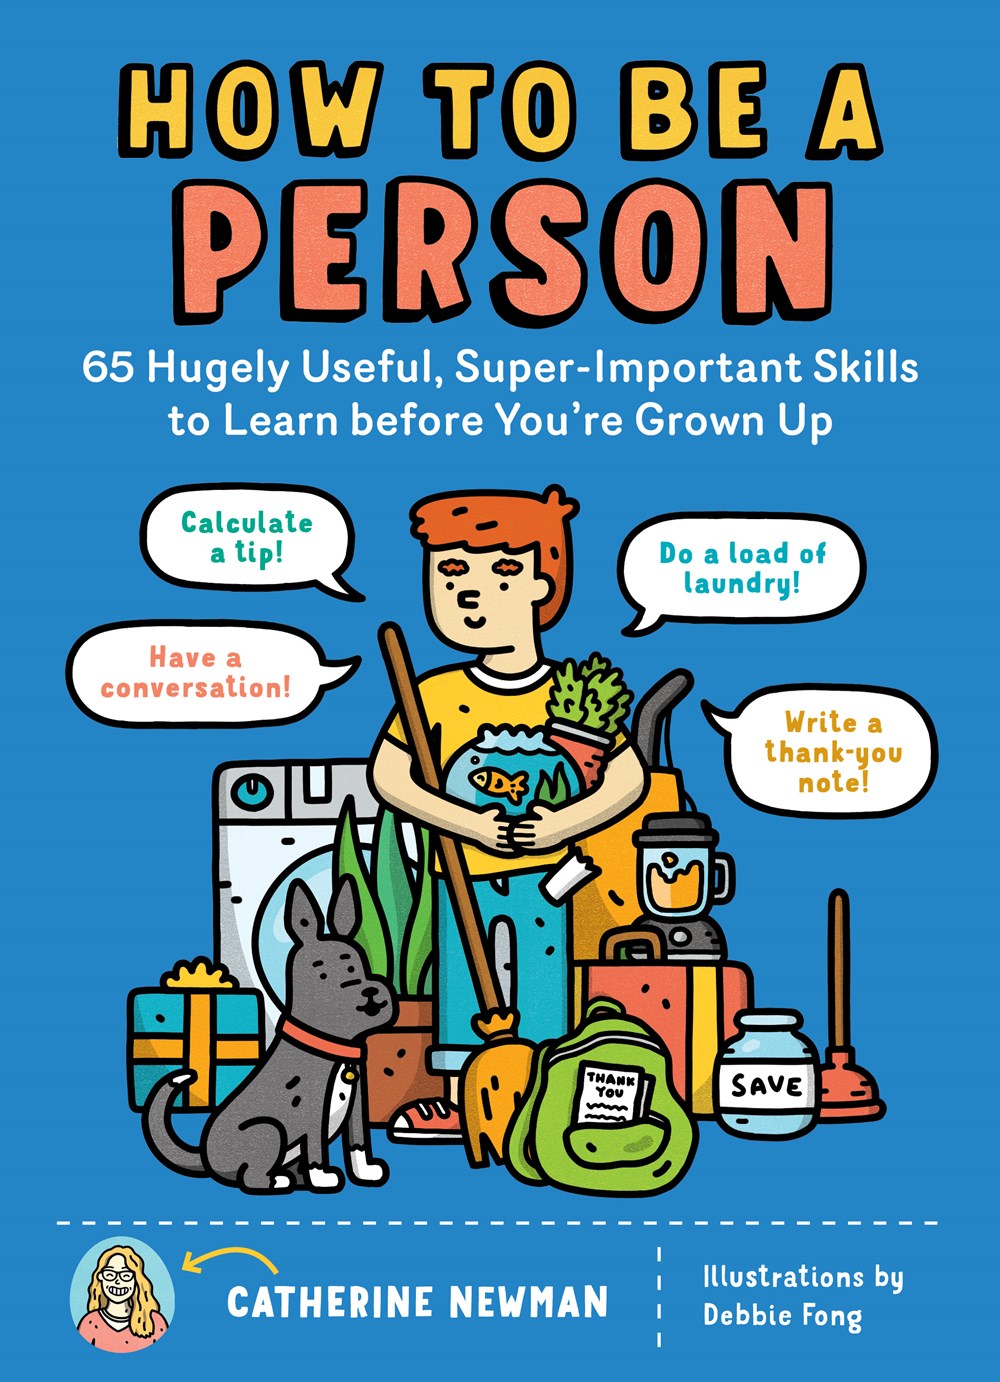 How To Be a Person: 65 Hugely Useful, Super-Important Skills To Learn Before You’re Grown Up